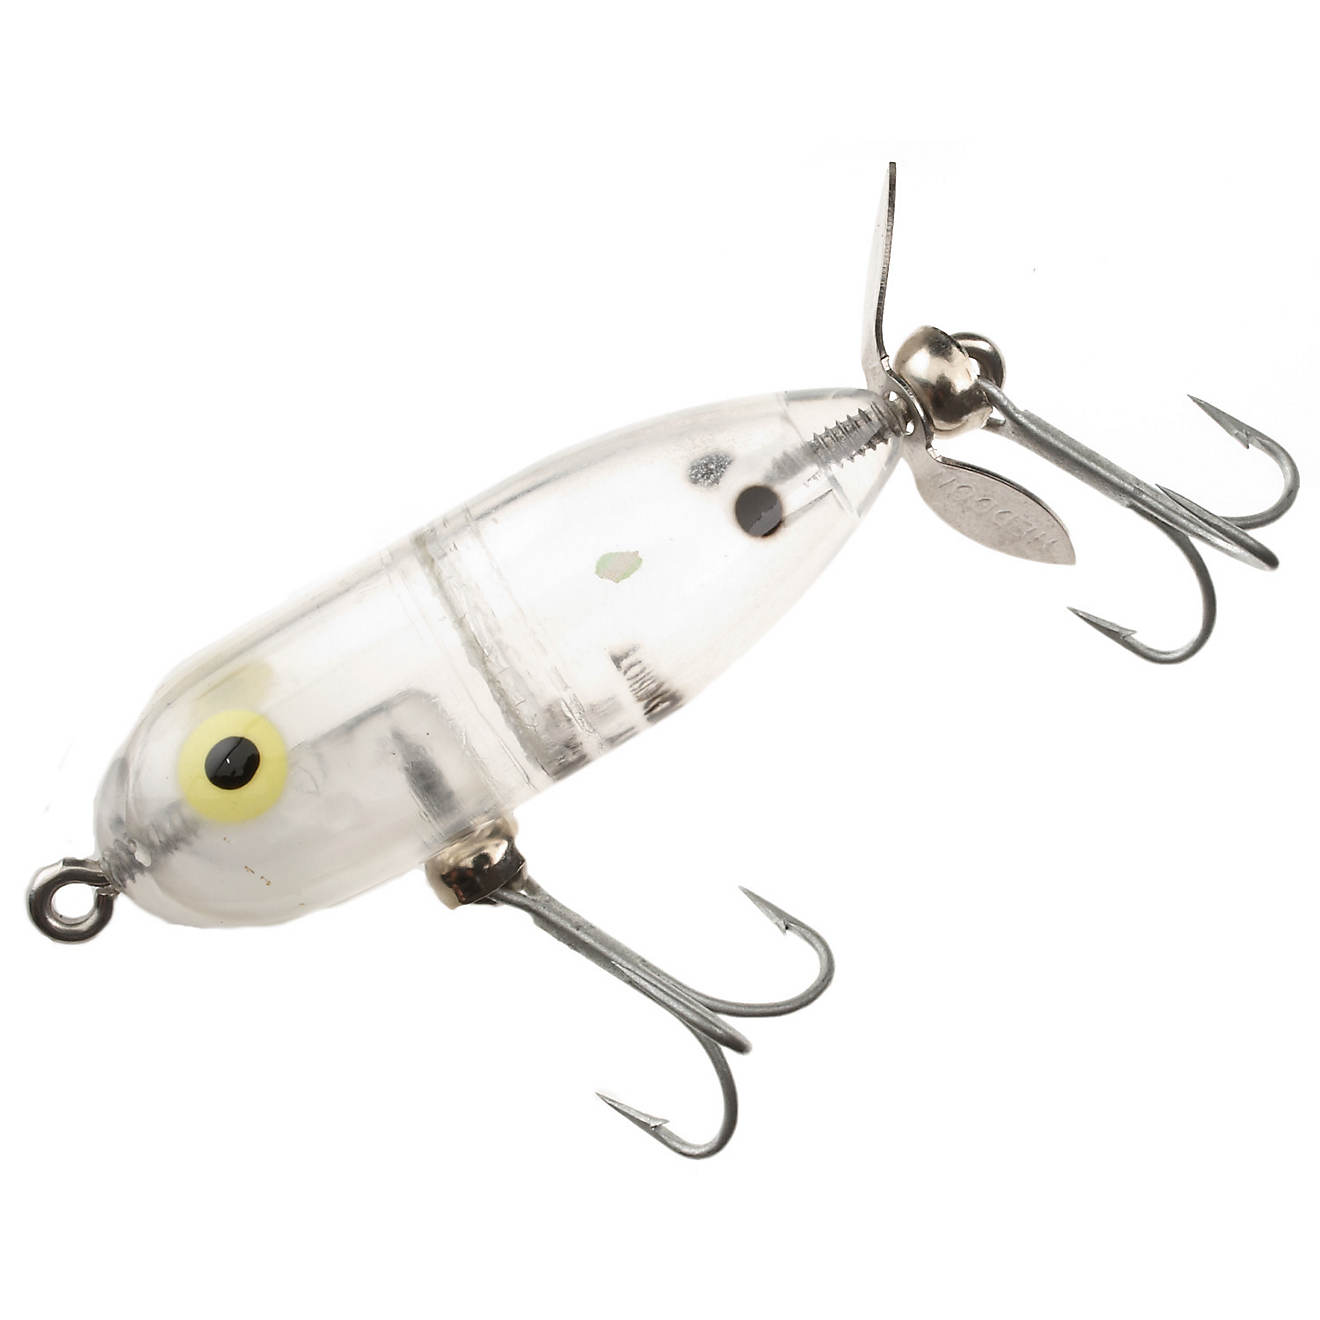 Heddon 1 7/8" TINY TORPEDO 1/4oz Topwater X0360BF a Fly or Lite Casting Lure 